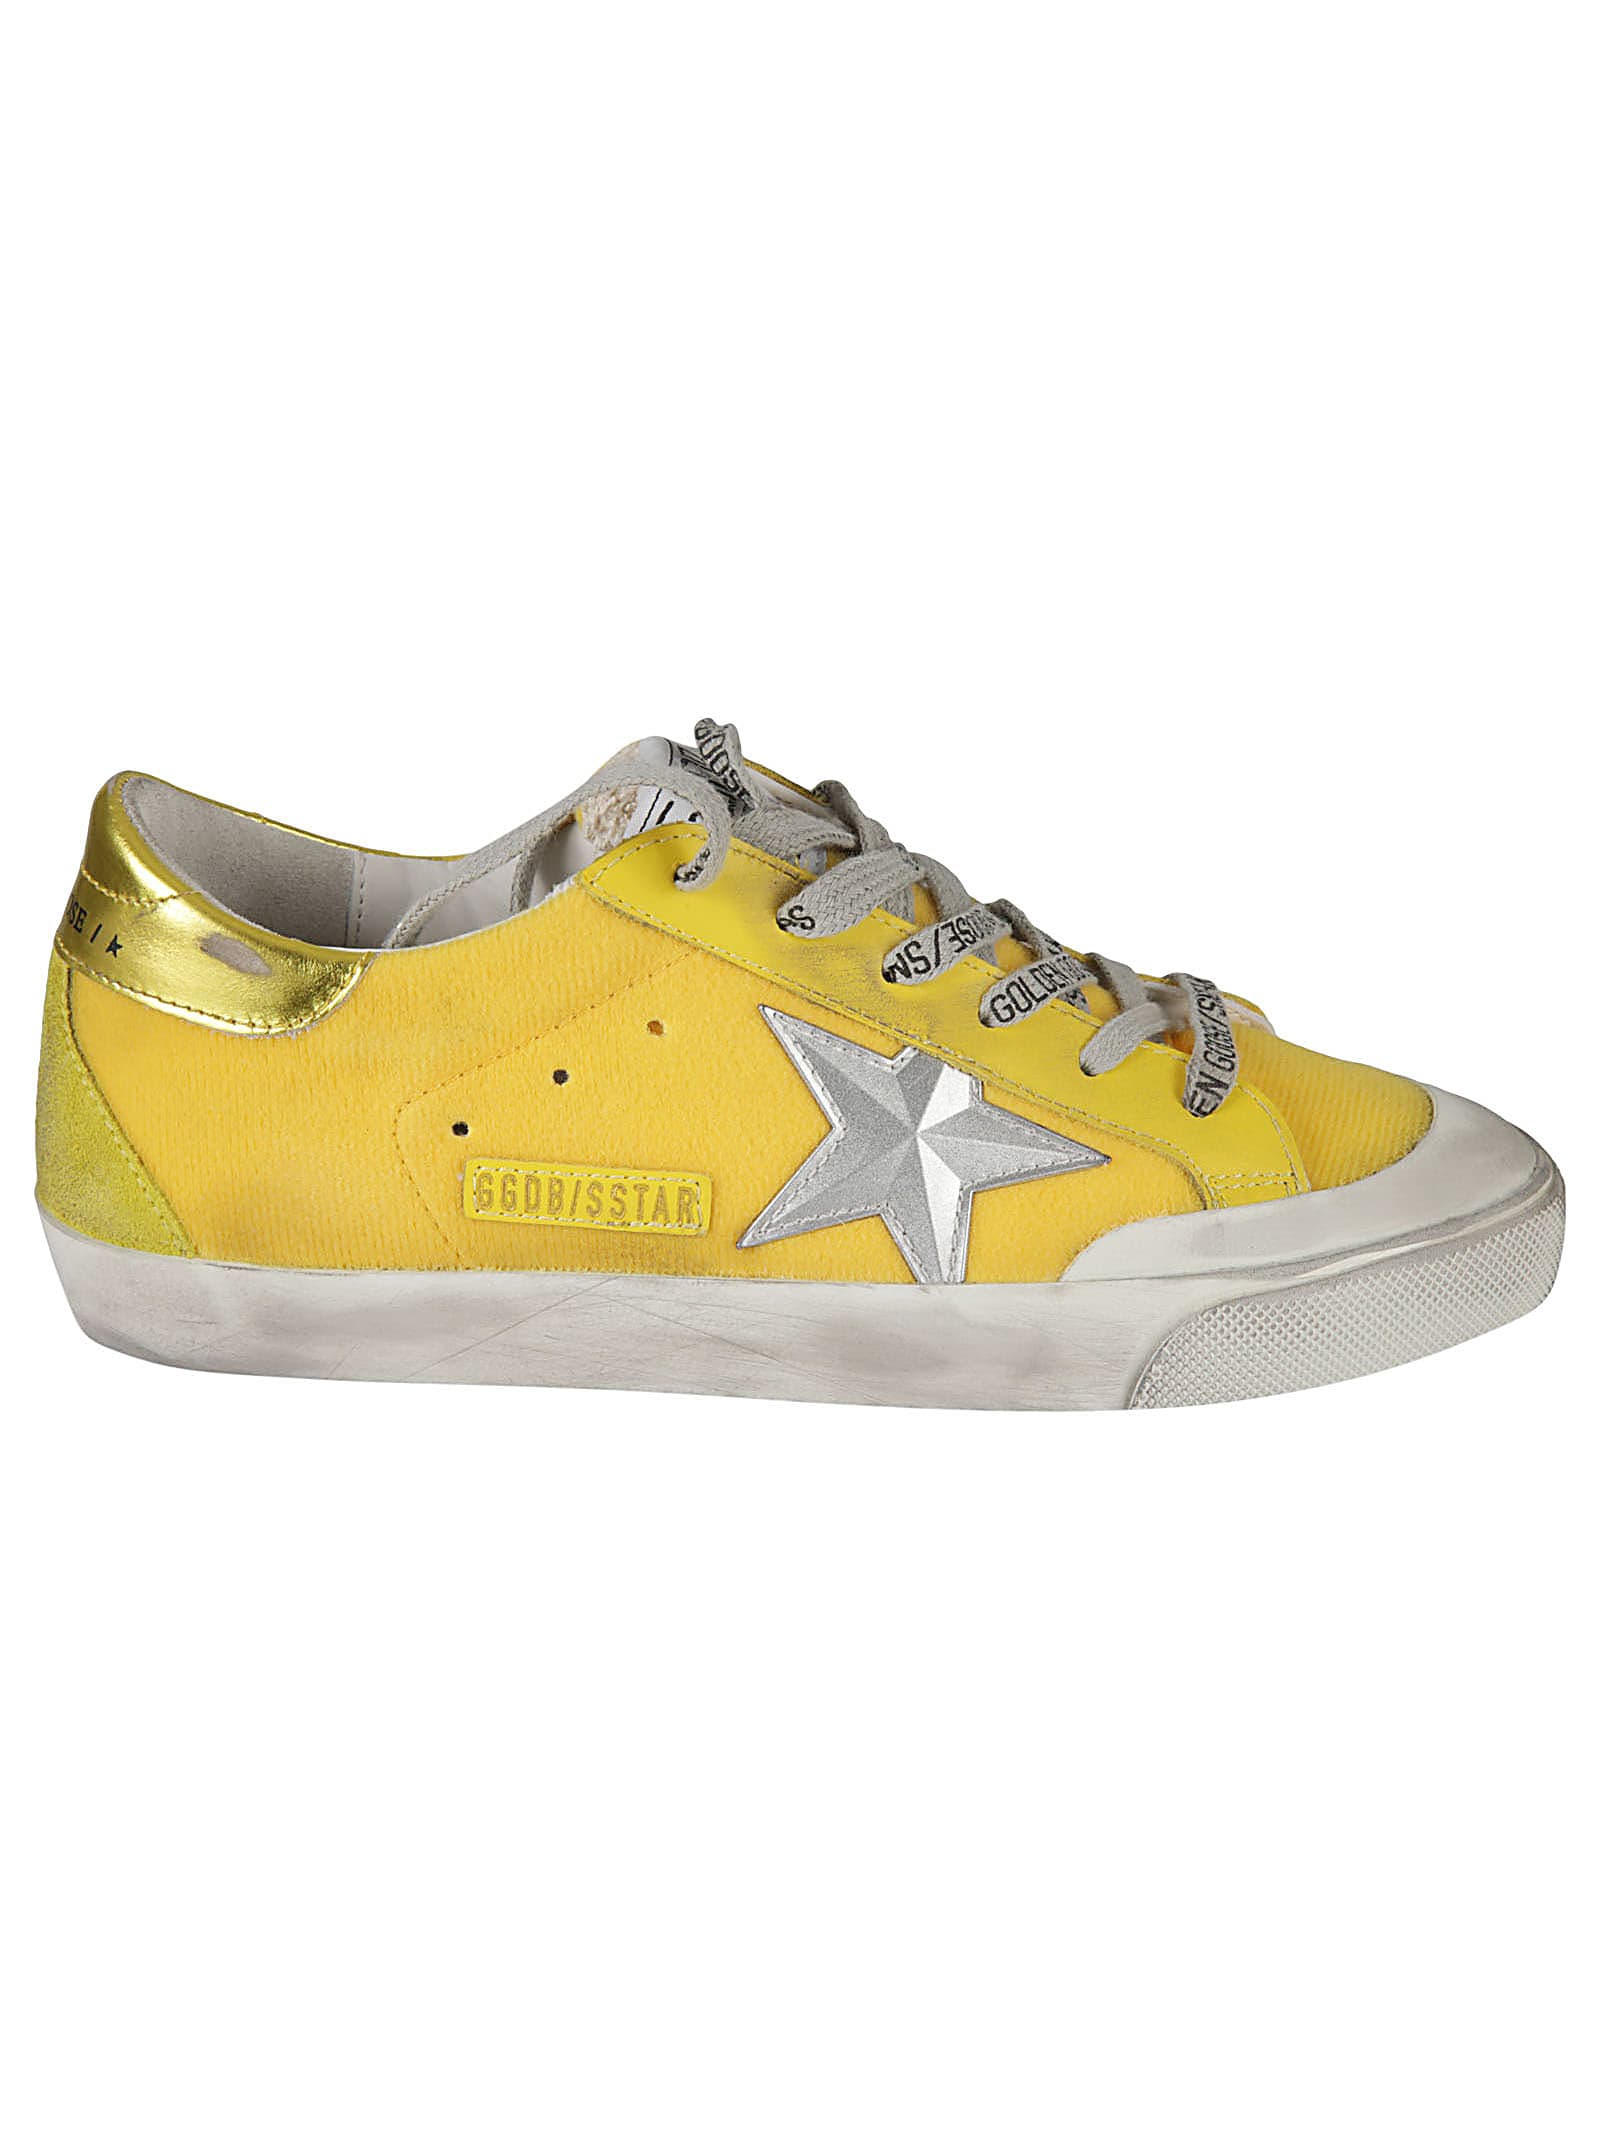 Buy Golden Goose Super Star Penstar Sneakers online, shop Golden Goose shoes with free shipping